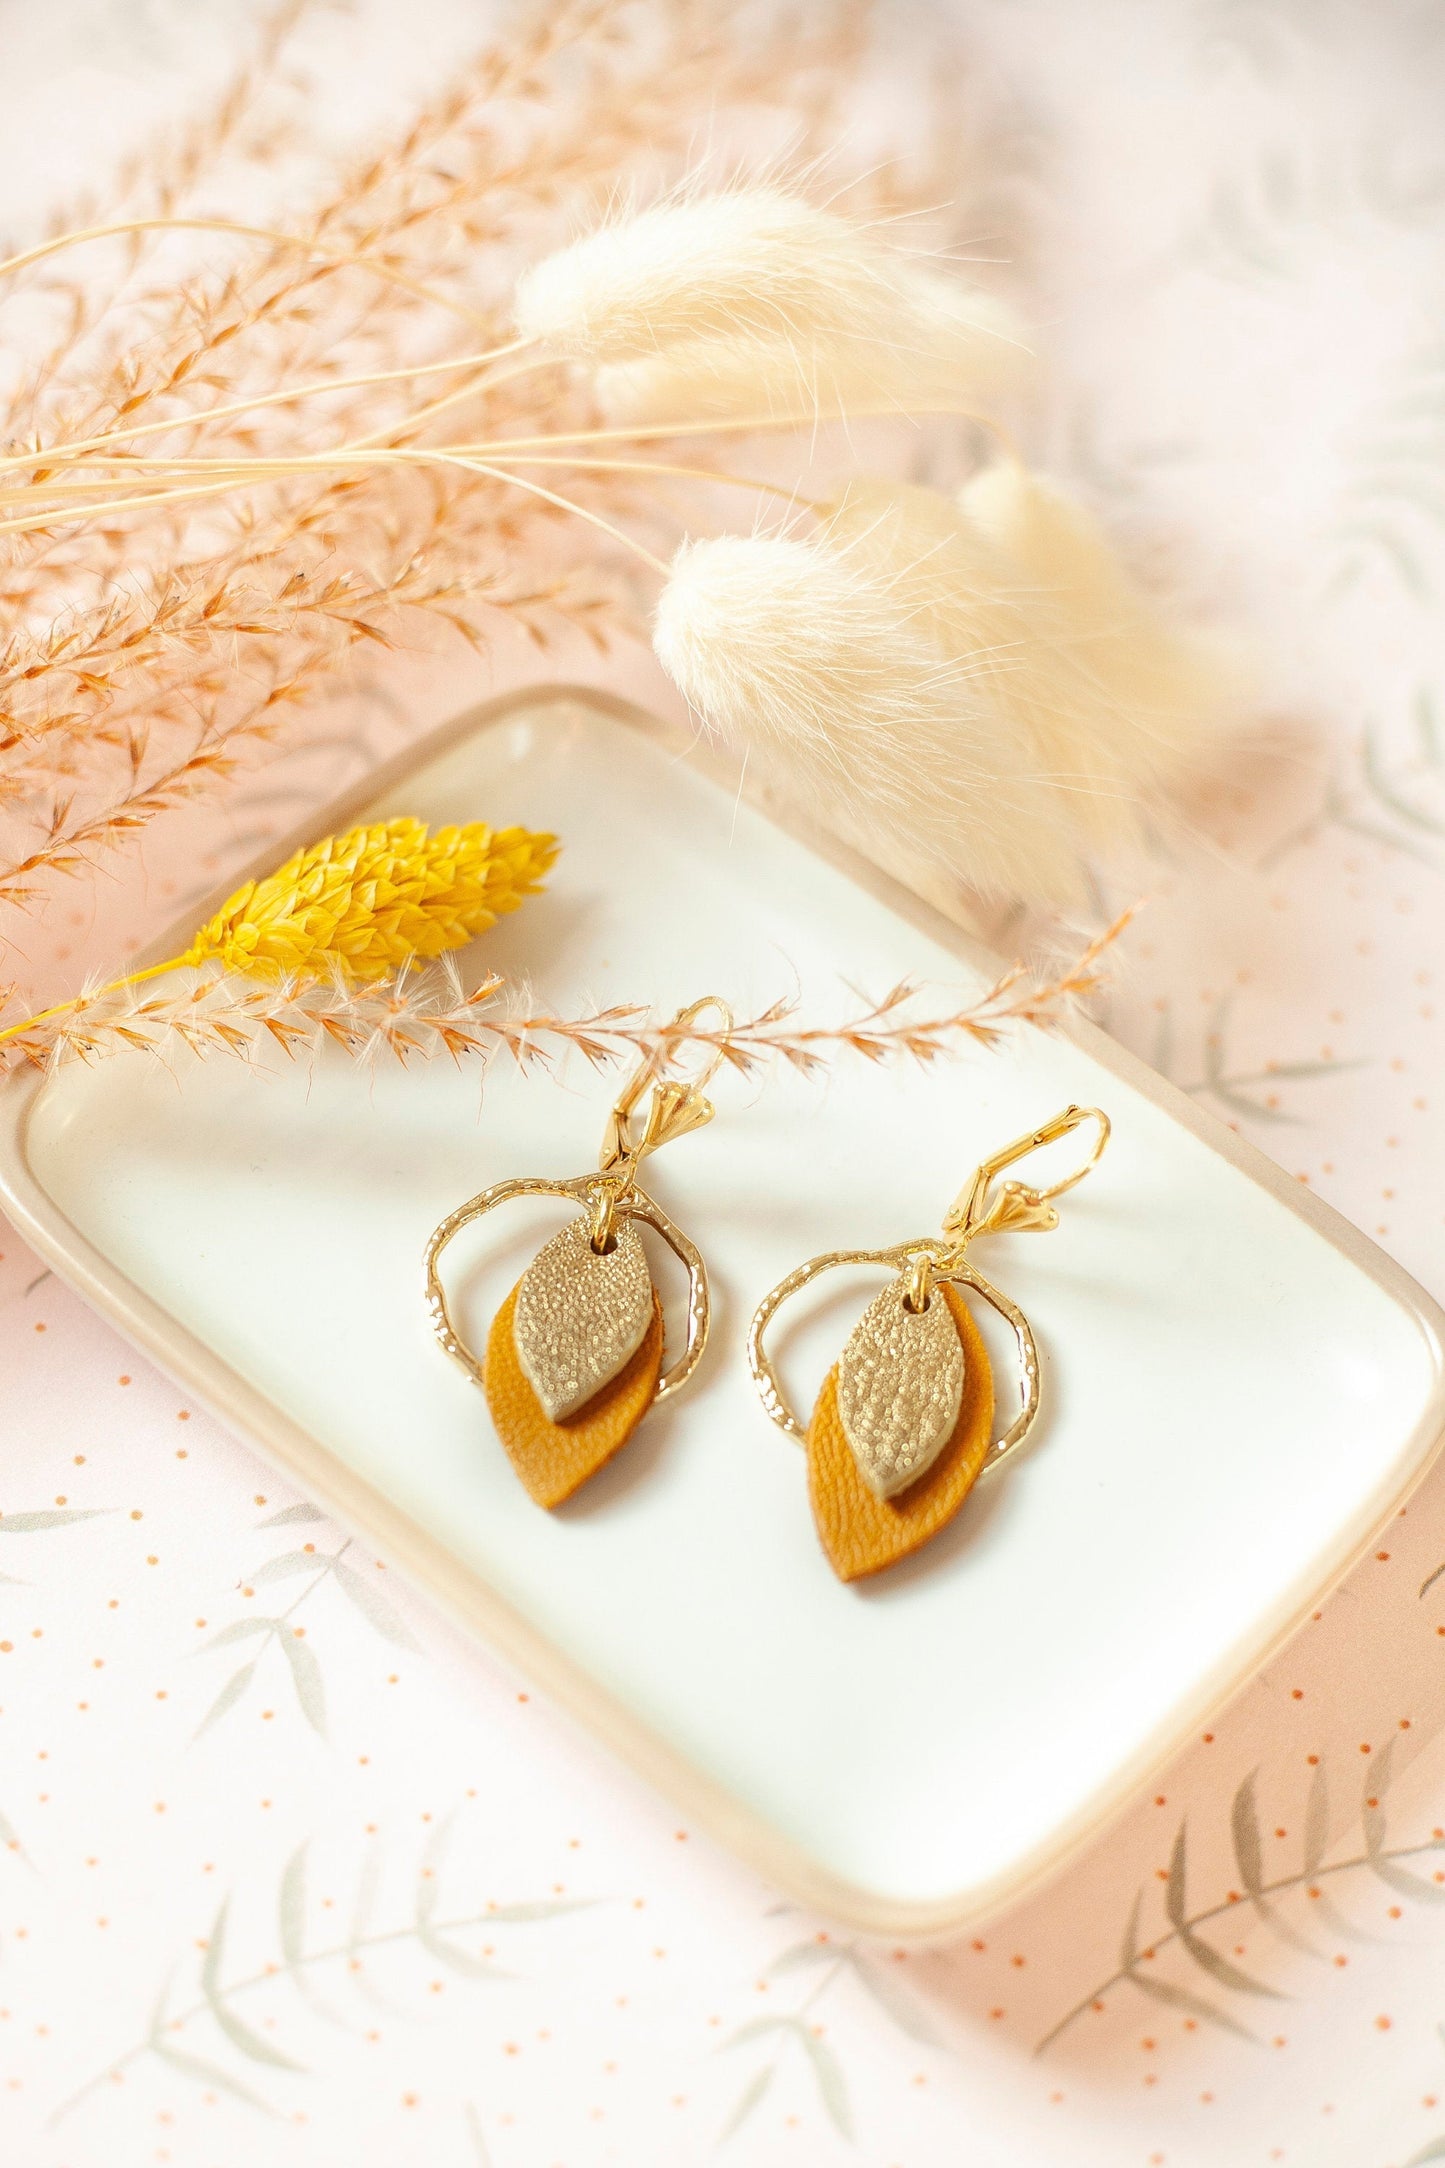 Mustard yellow and gold leather earrings